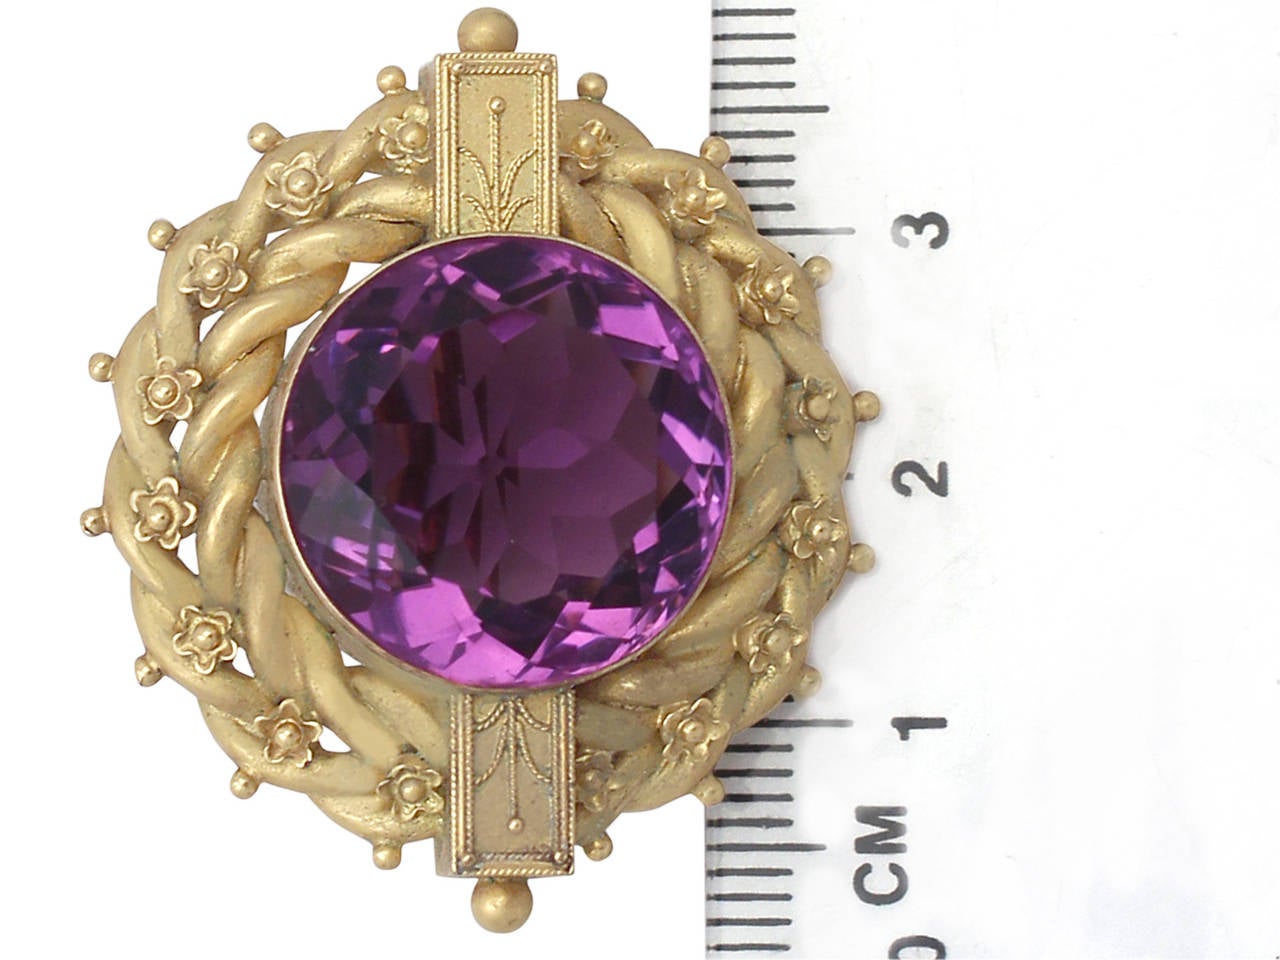 18.91Ct Amethyst and 20k Yellow Gold Brooch - Antique Victorian 2